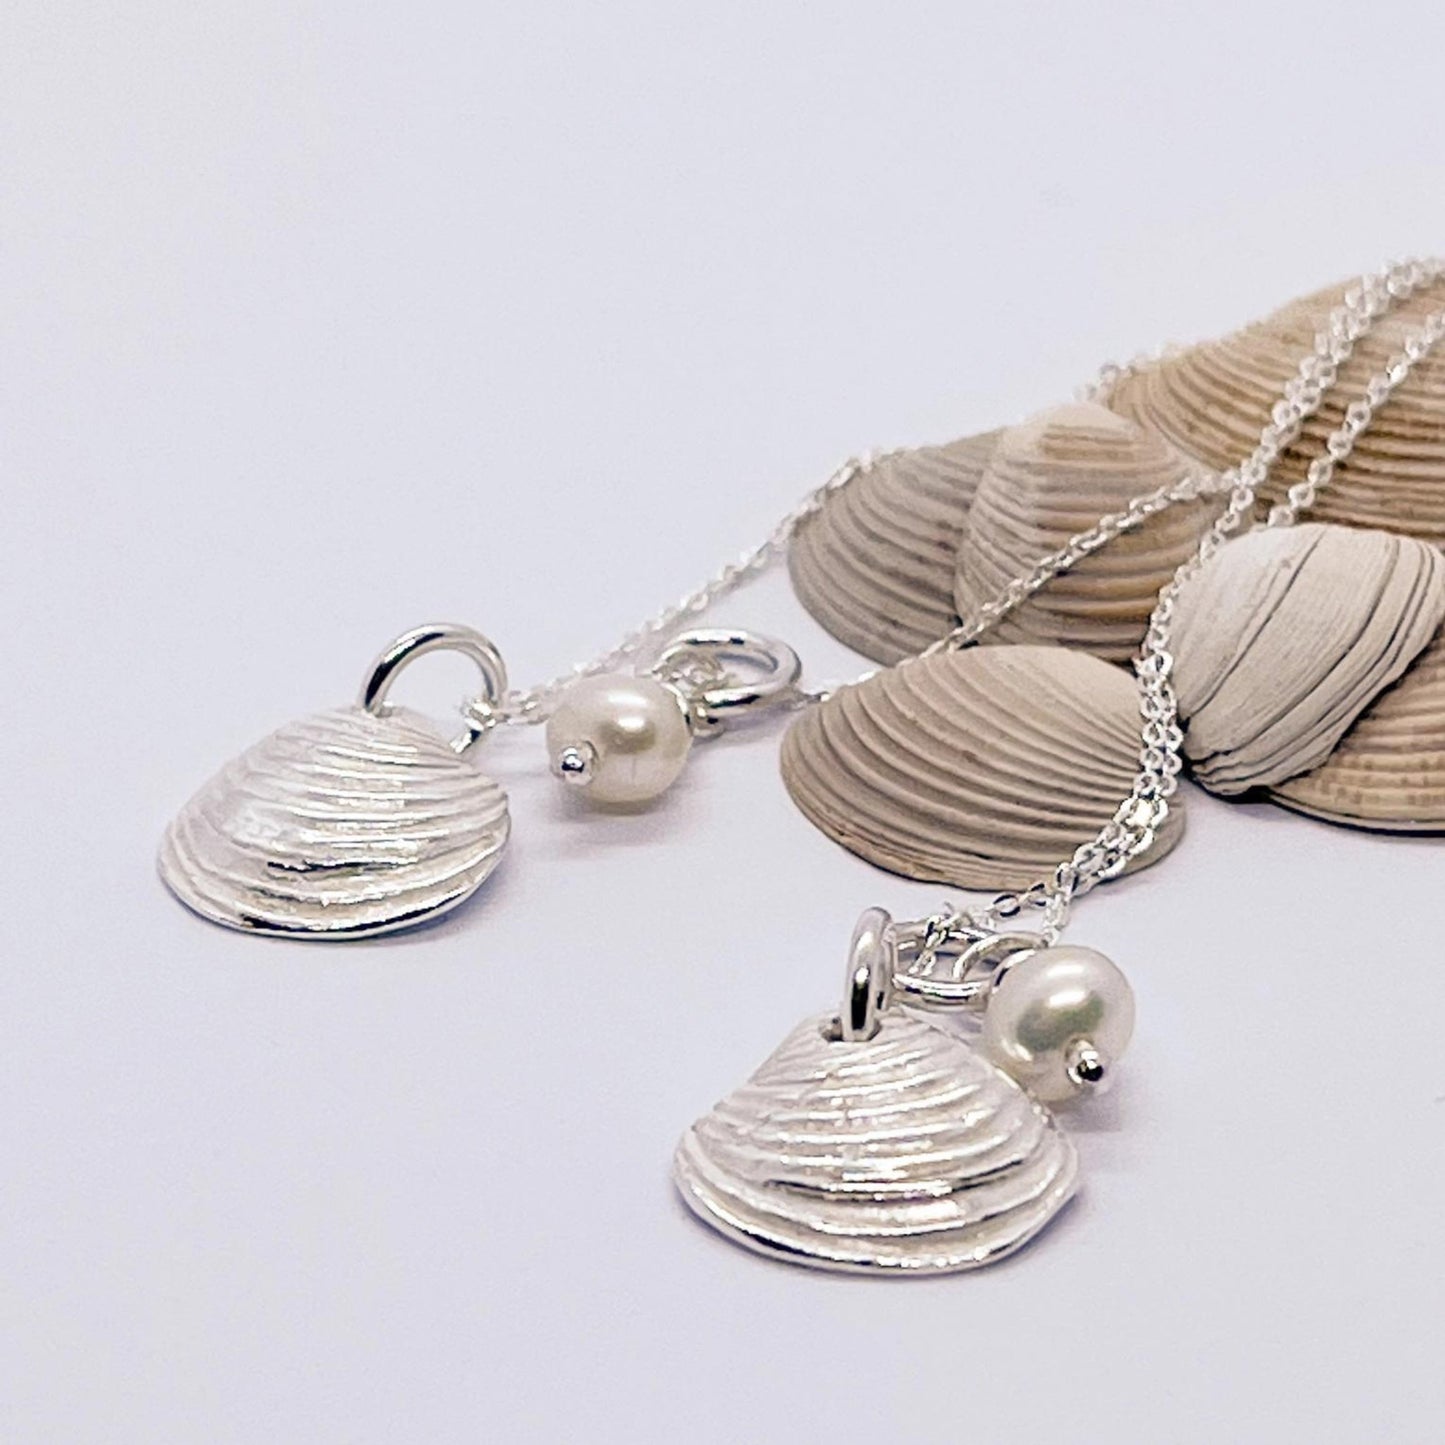 Silver Scottish Clam Shell Necklace - The Little Jewellery Company